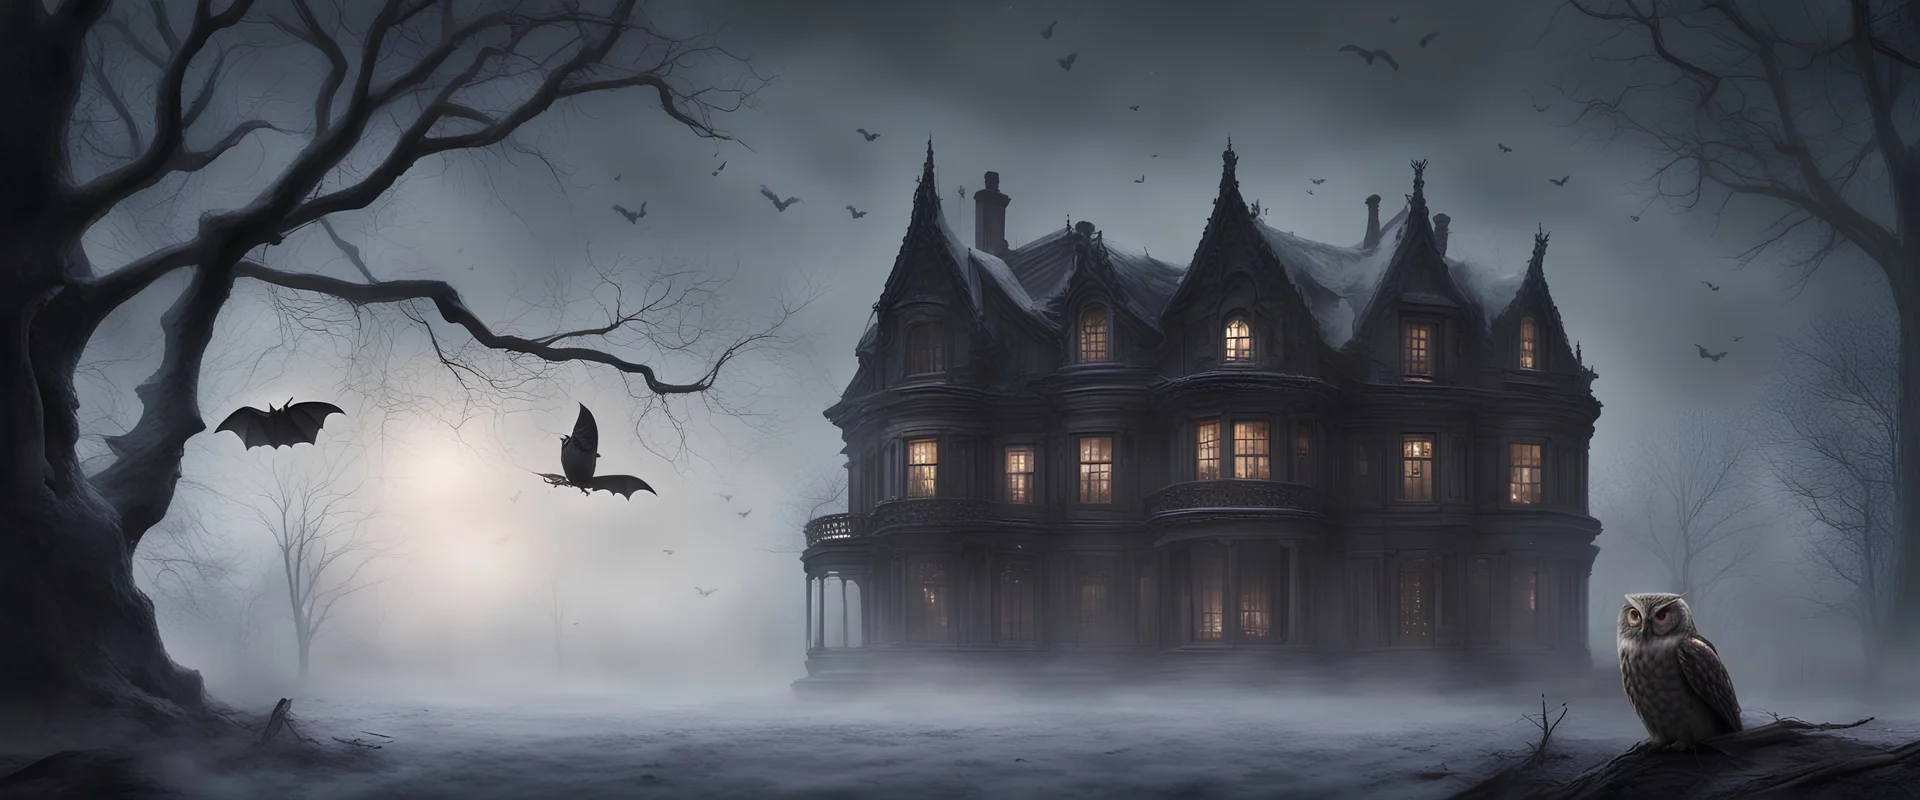 Hyper Realistic bats flying behind a huge dark mansion with owl sitting on dry old tree at a foggy snowfall night